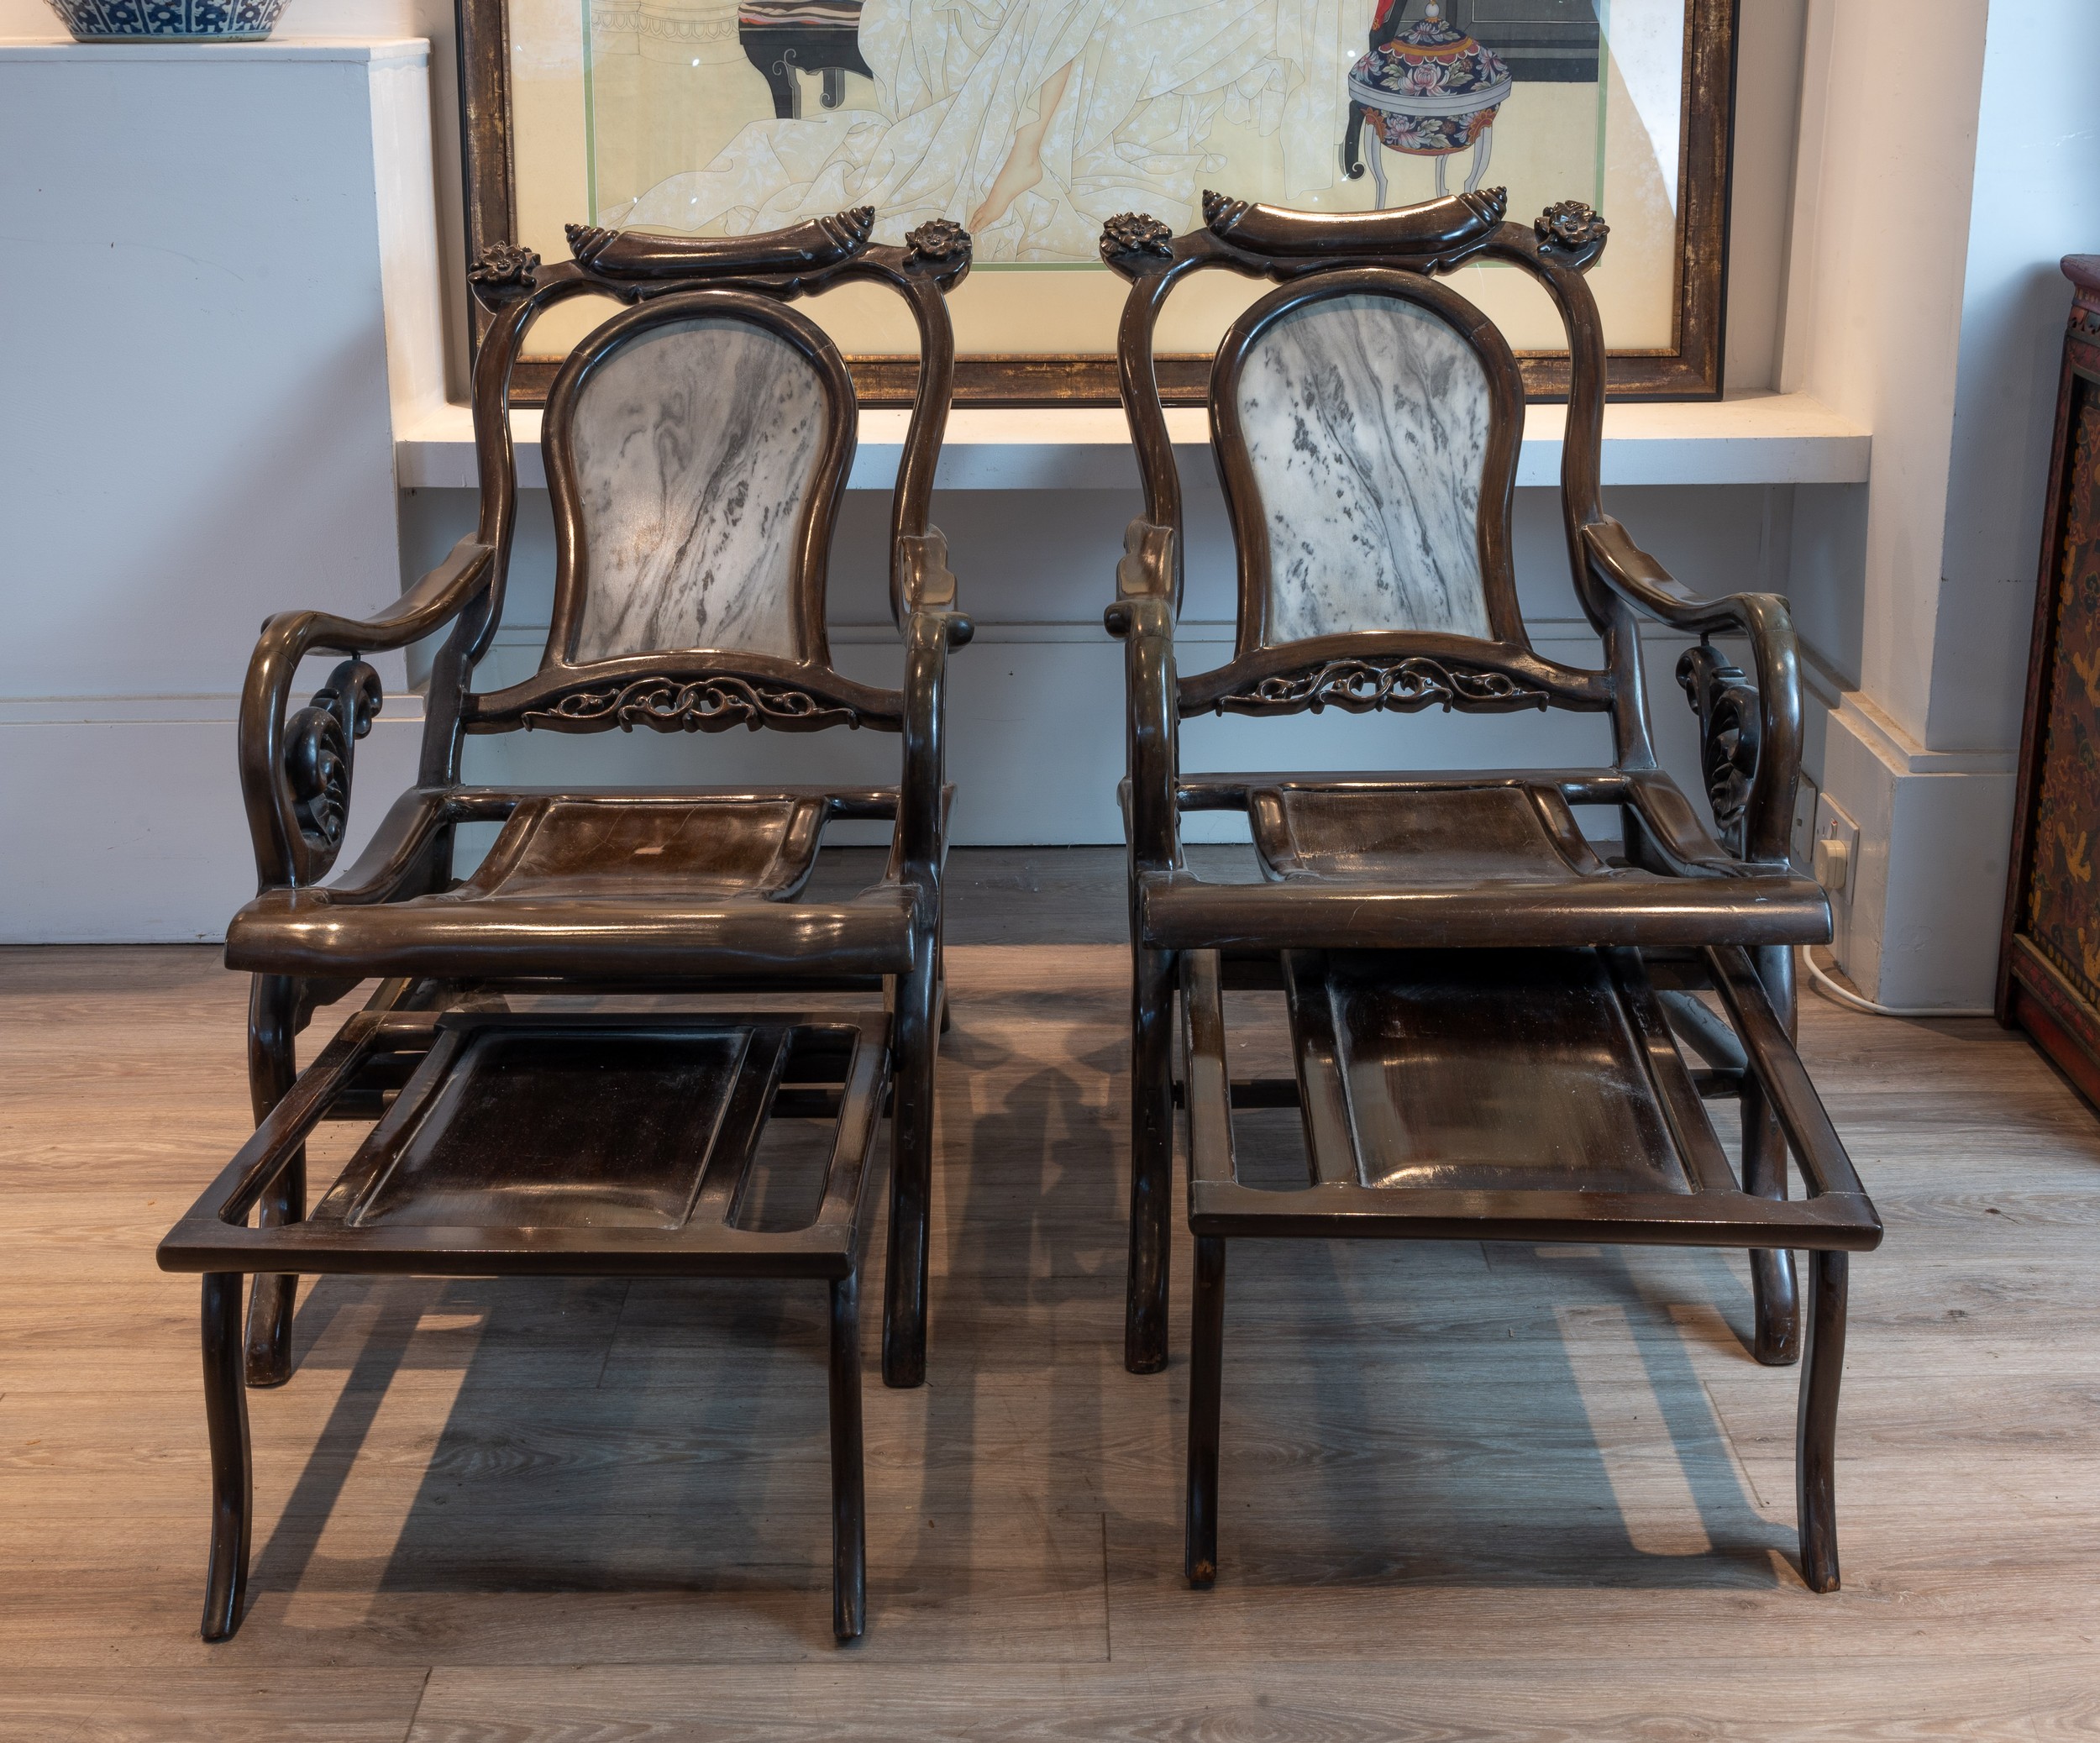 PAIR OF 20TH CENTURY CHINESE HARDWOOD 'MOON GAZING' CHAIRS, With floral carved headrests, Dali - Image 5 of 6